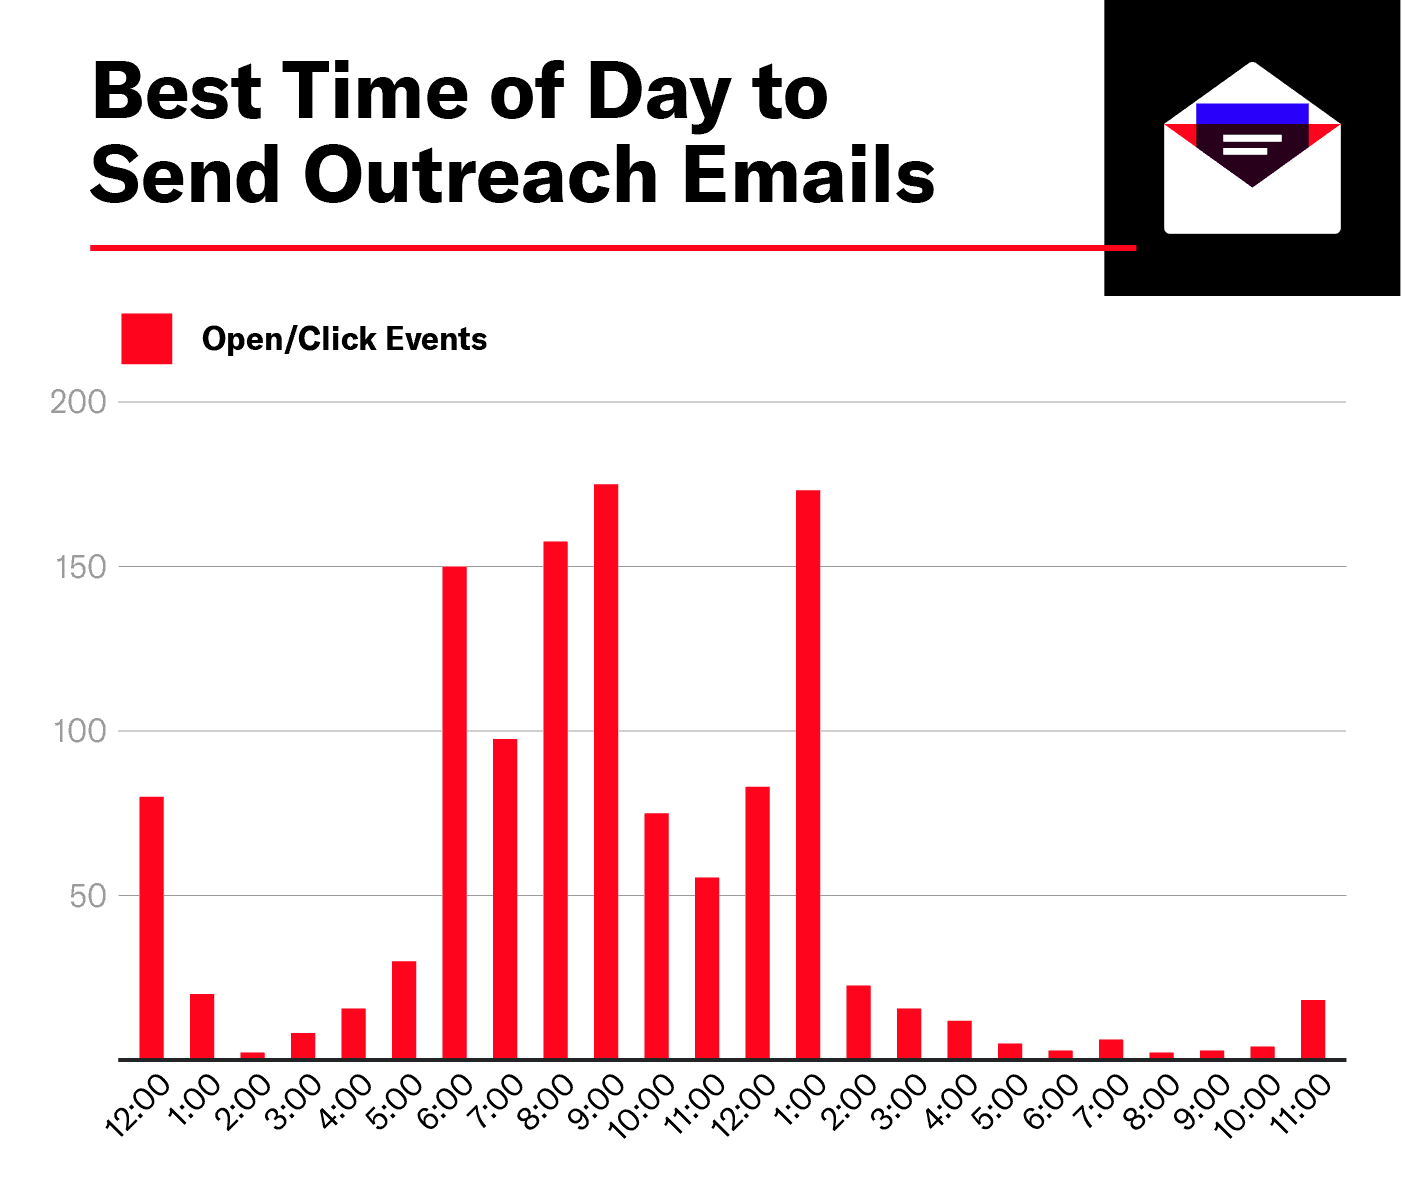 The Best Time to Send Outreach Emails Chart by Hour of Day by email opens and clicks